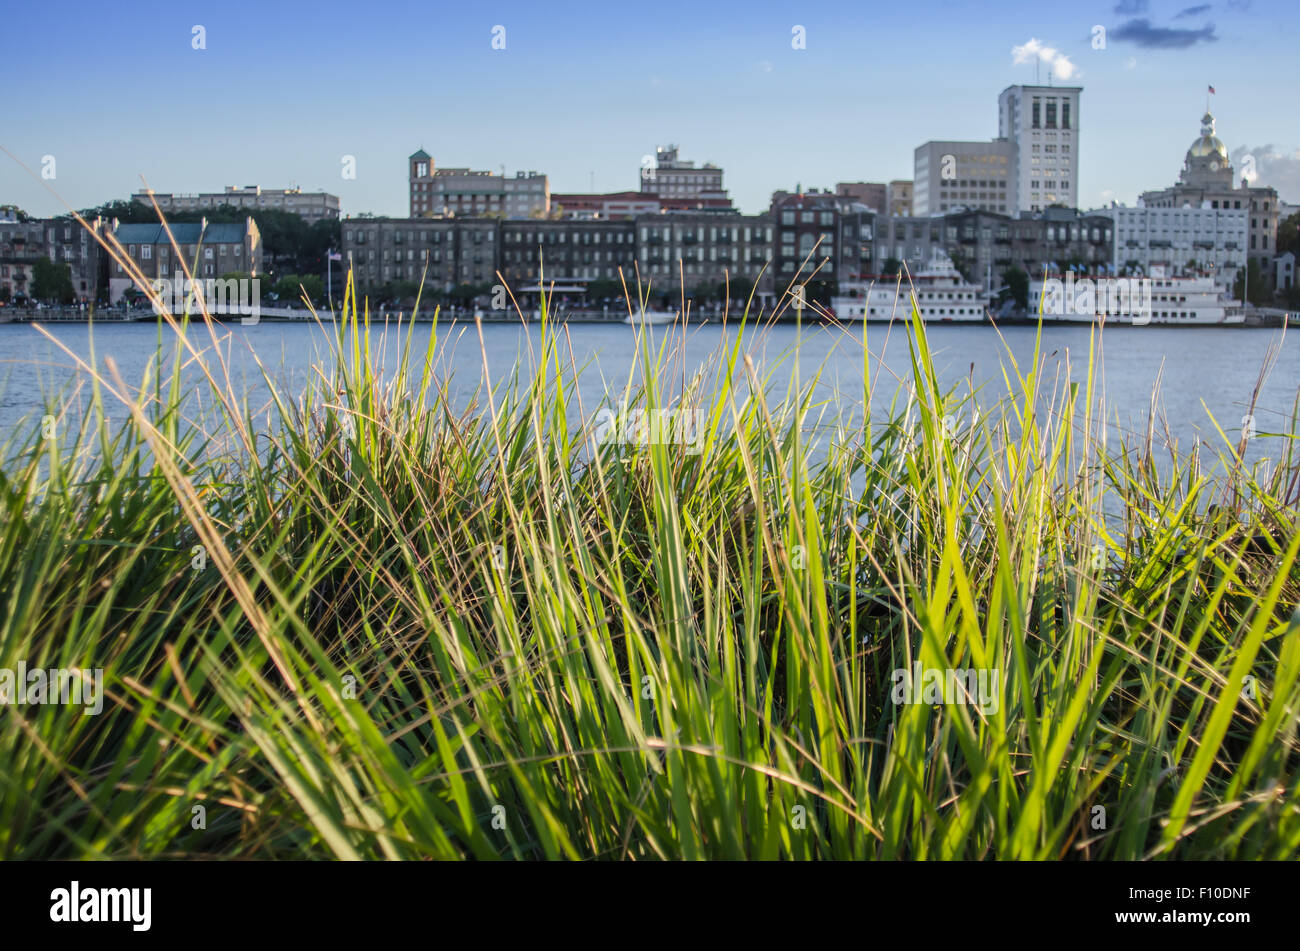 Green grasses with the Savannah riverfront blurred in the background Stock Photo